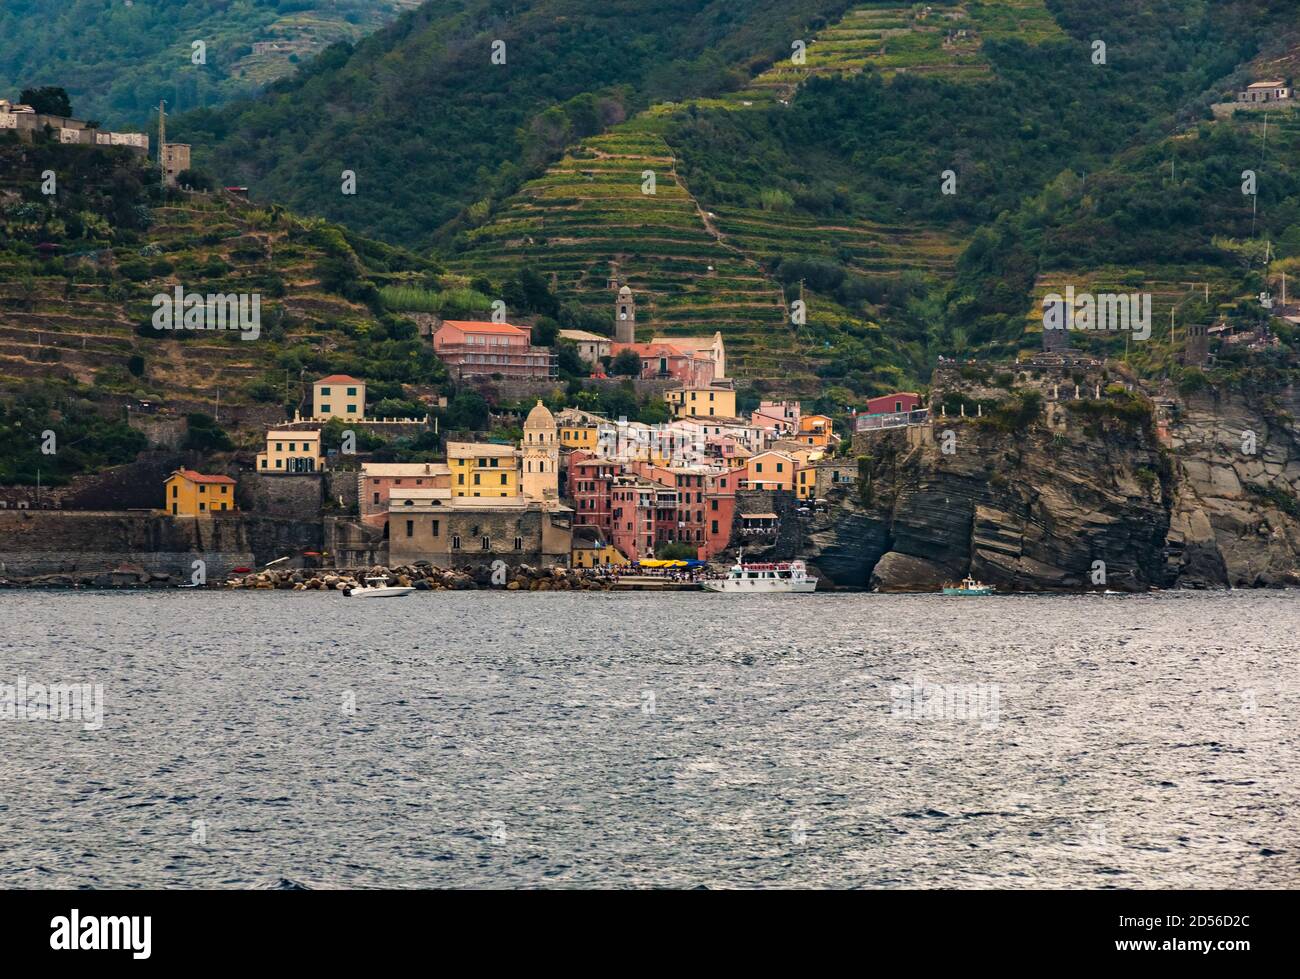 Nice panoramic view of Vernazza in the Cinque Terre coastal area from the sea. The colourful houses with the famous Church of Santa Margherita... Stock Photo